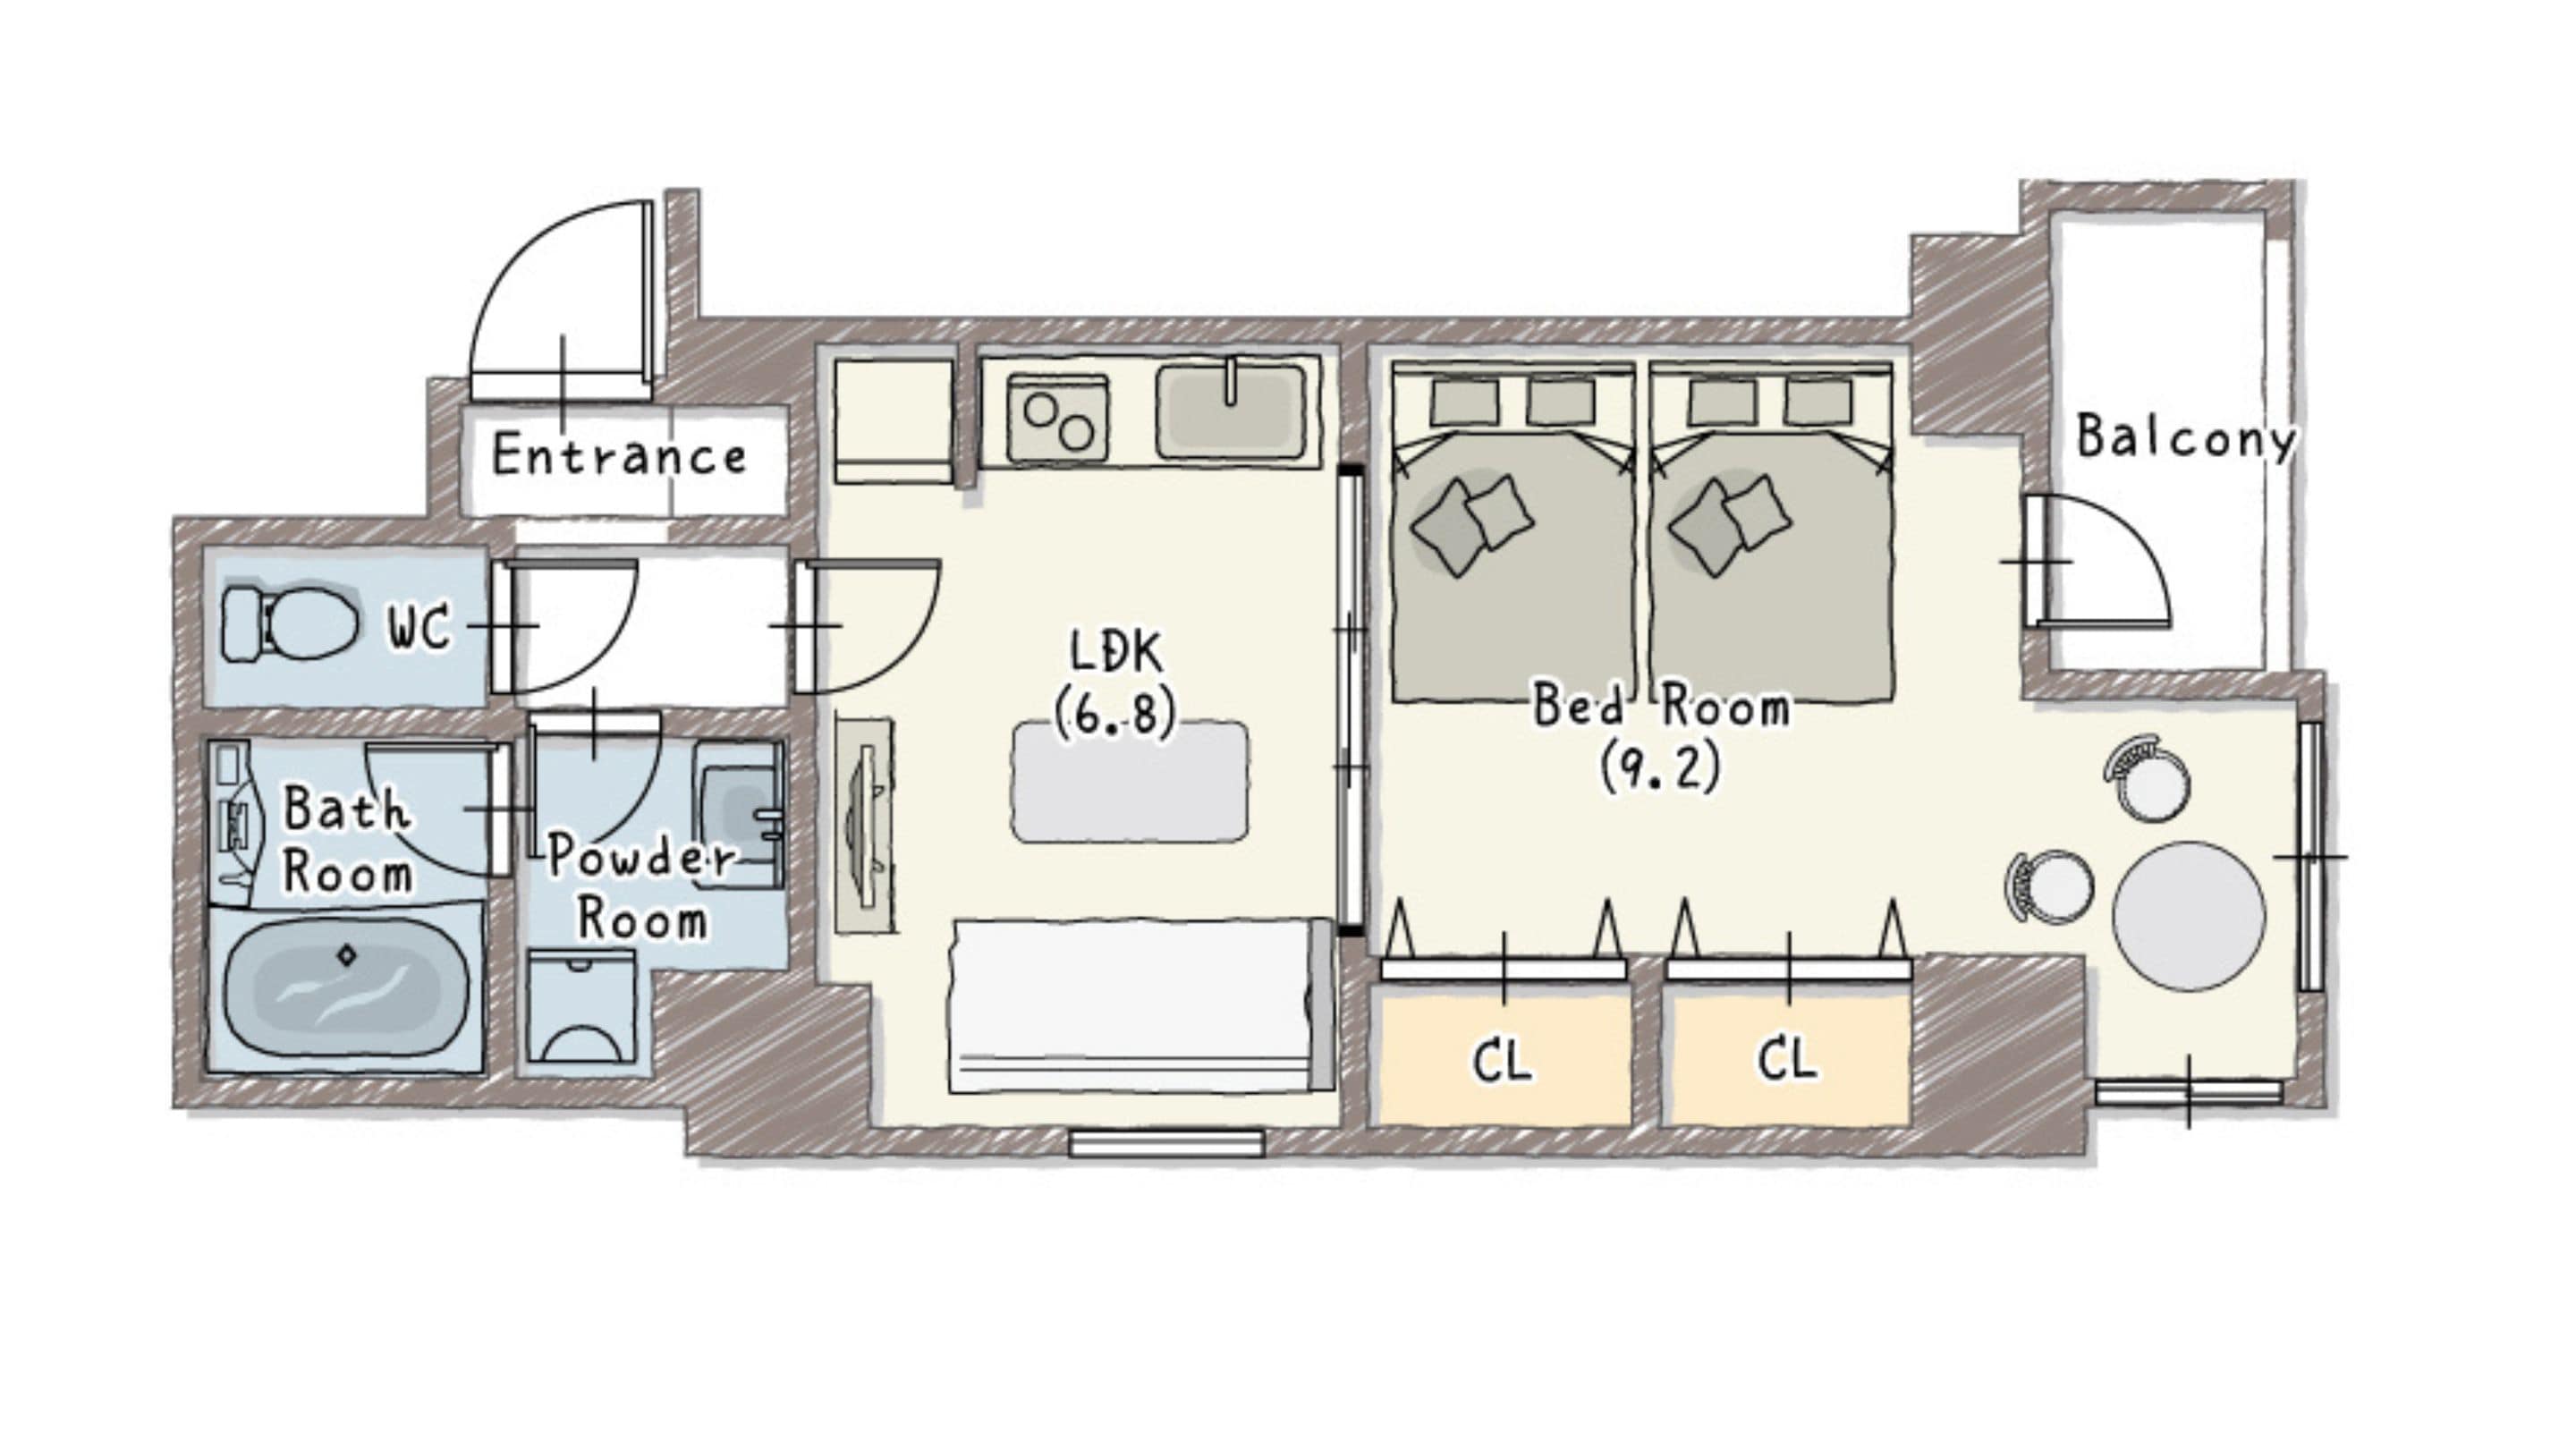 Floor plan for the Deluxe Hollywood Twin Room.